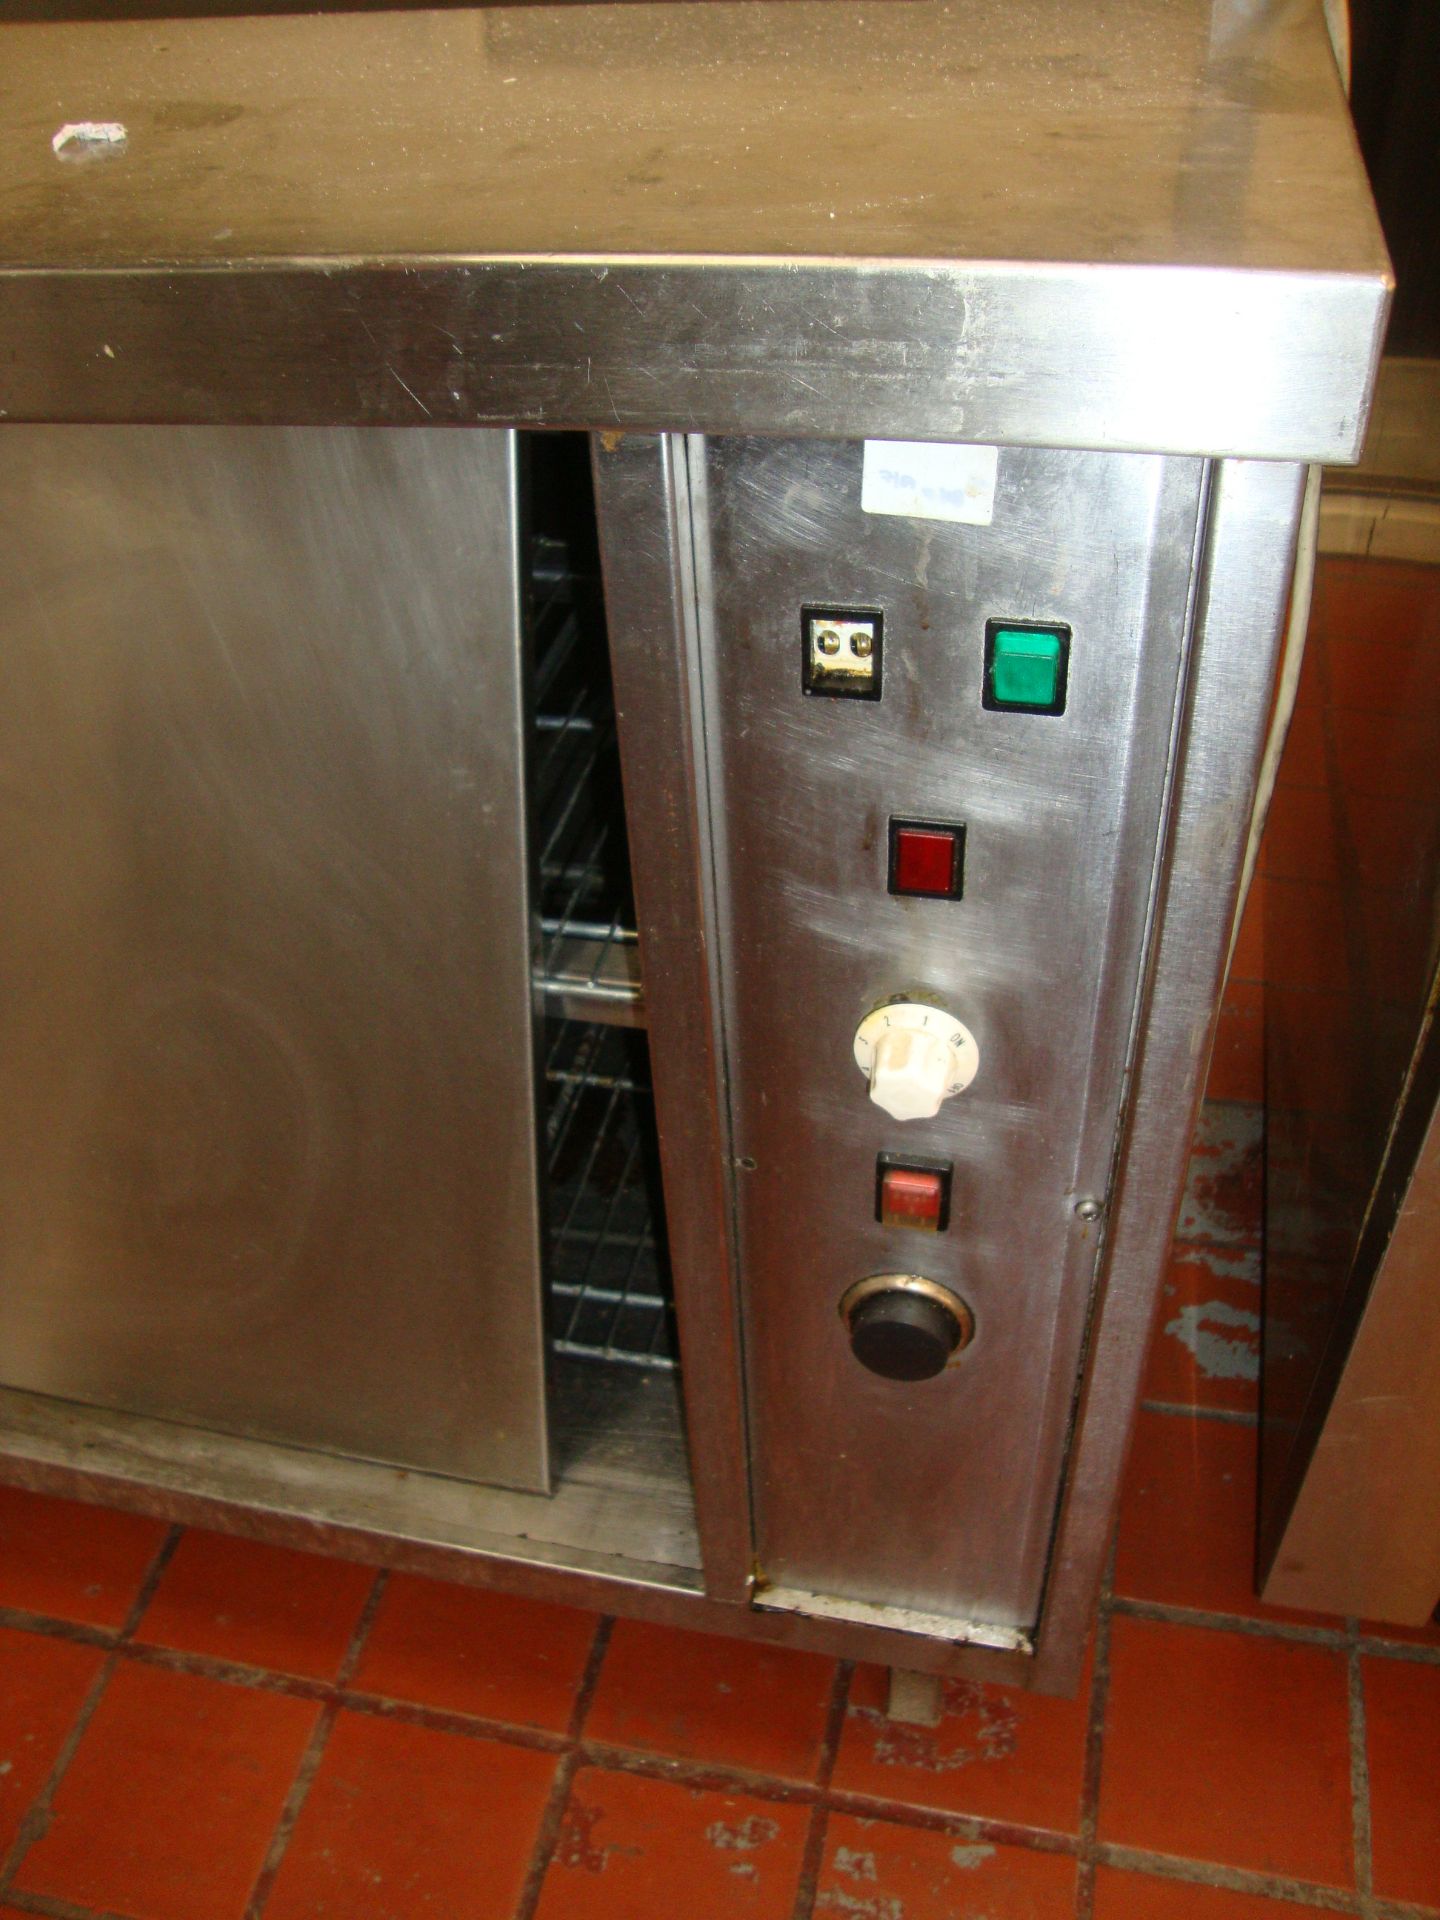 Stainless steel warming cupboard with bain marie section & illuminated serving shelves above, 59" - Image 4 of 4